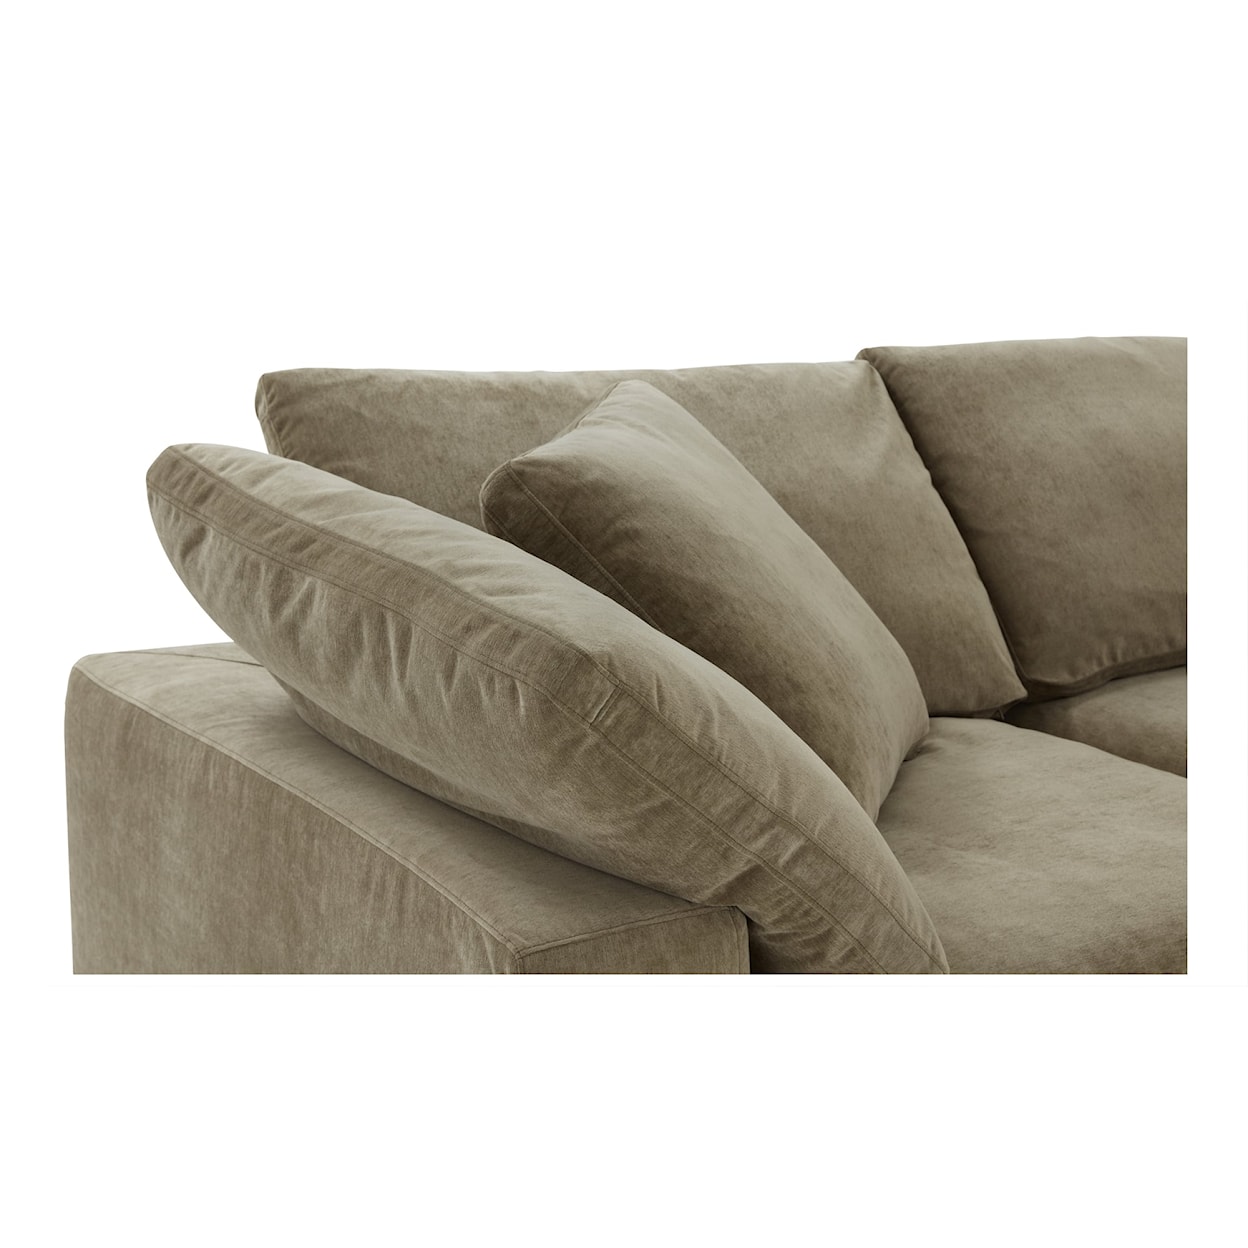 Moe's Home Collection Terra Dream Sectional Sofa